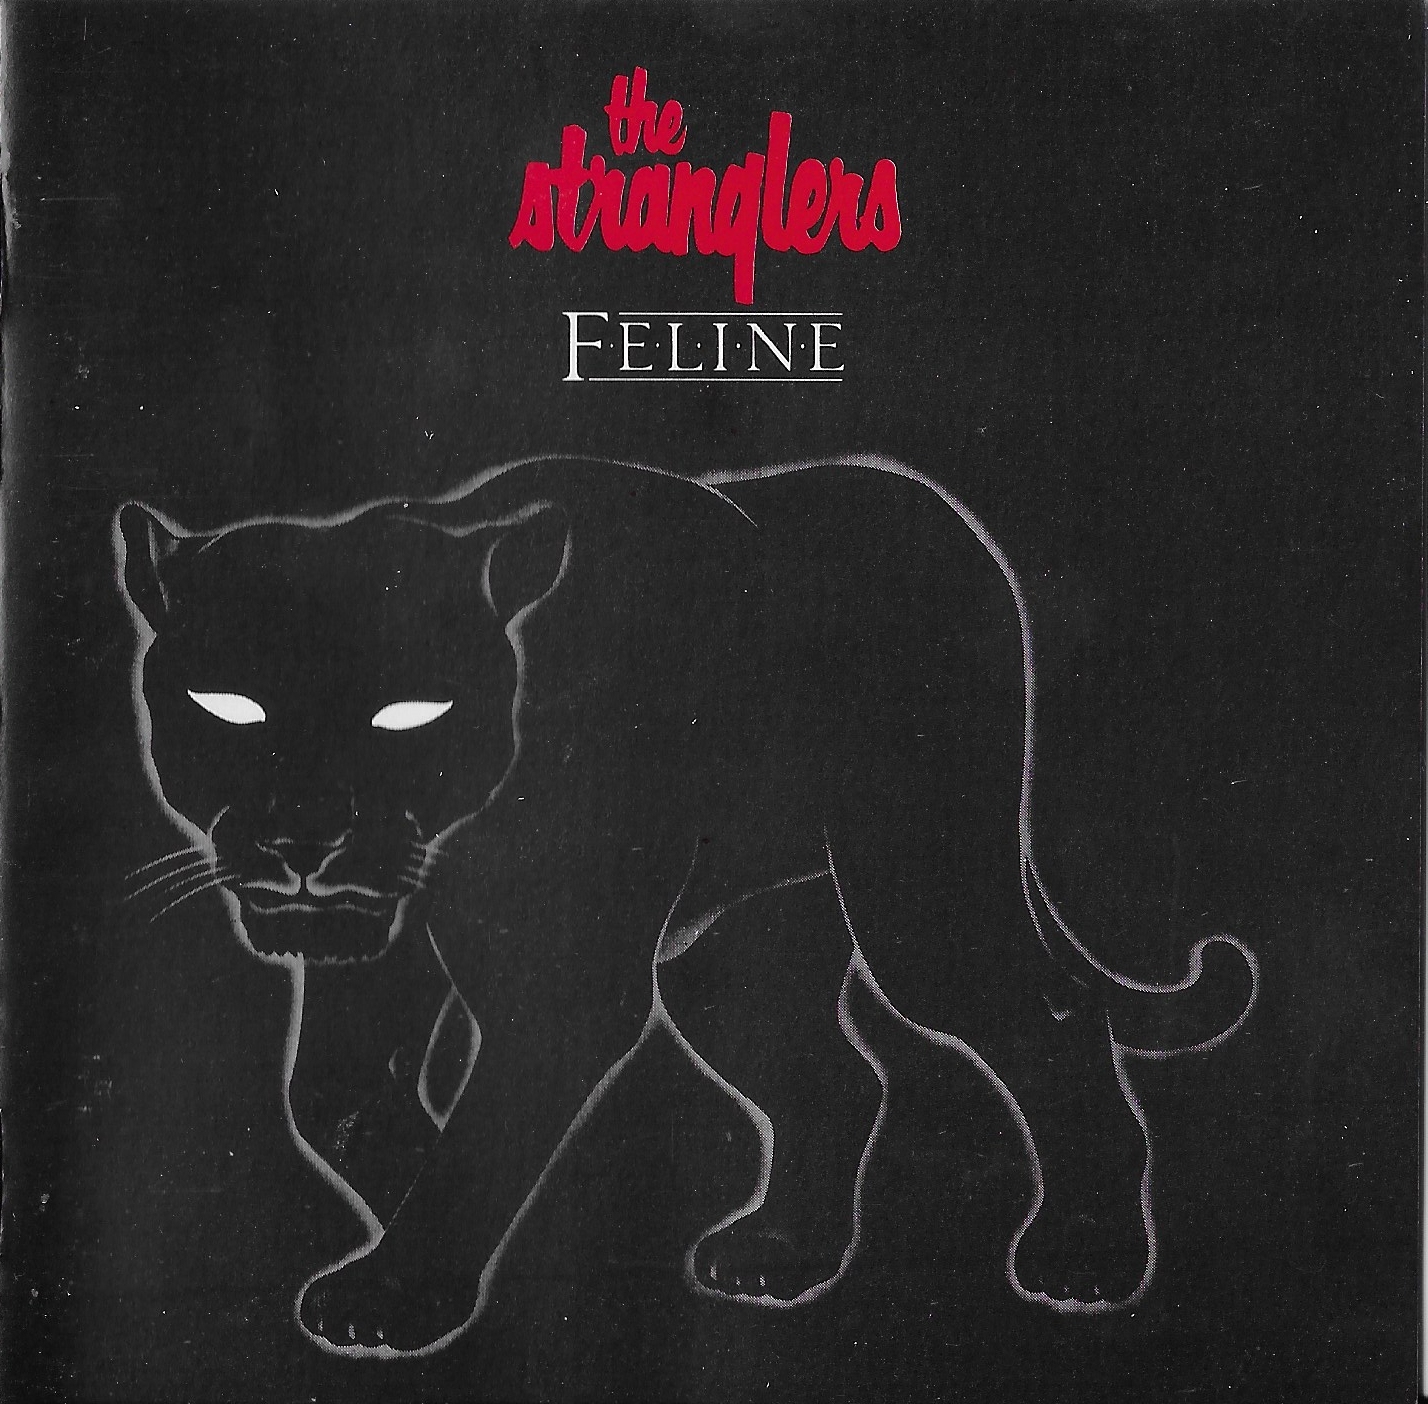 Picture of CDEPC 25237 Feline by artist The Stranglers